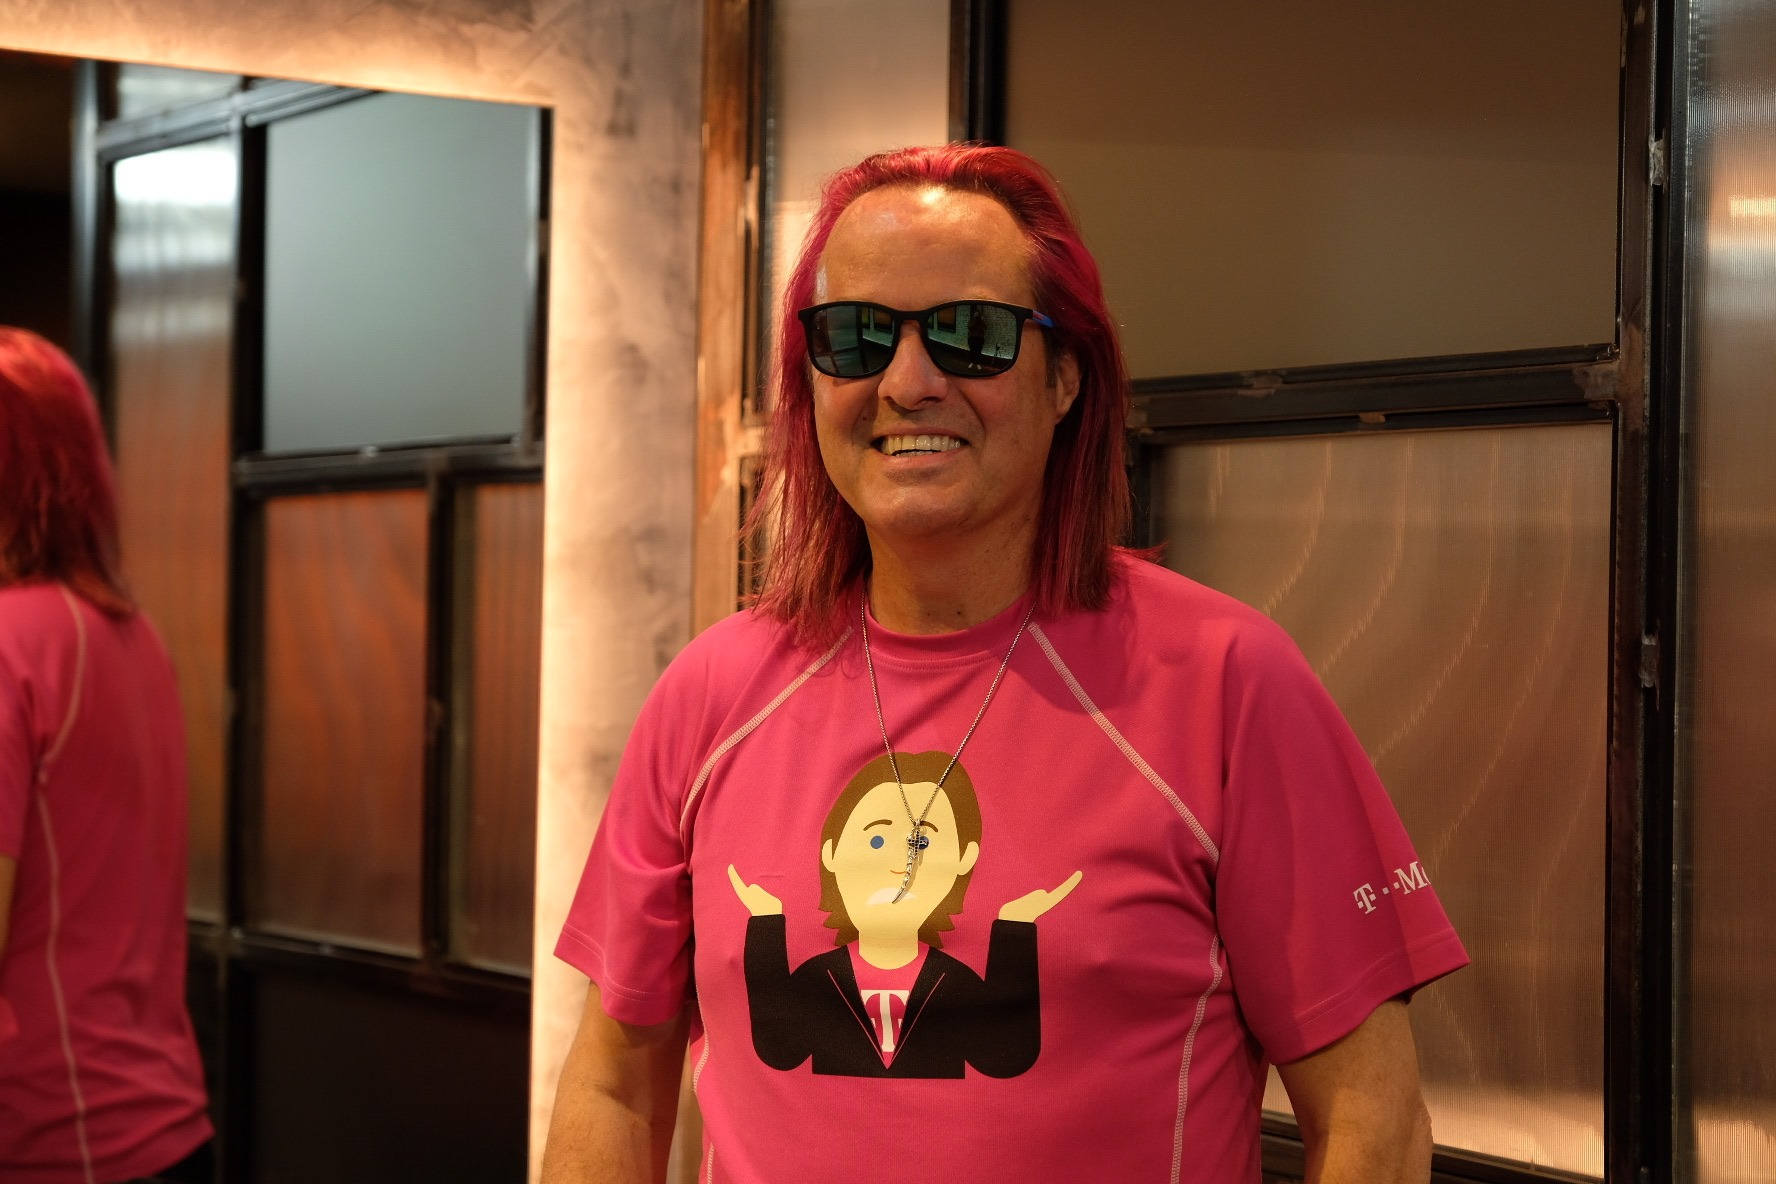 T-Mobile CEO John Legere in talks with WeWork